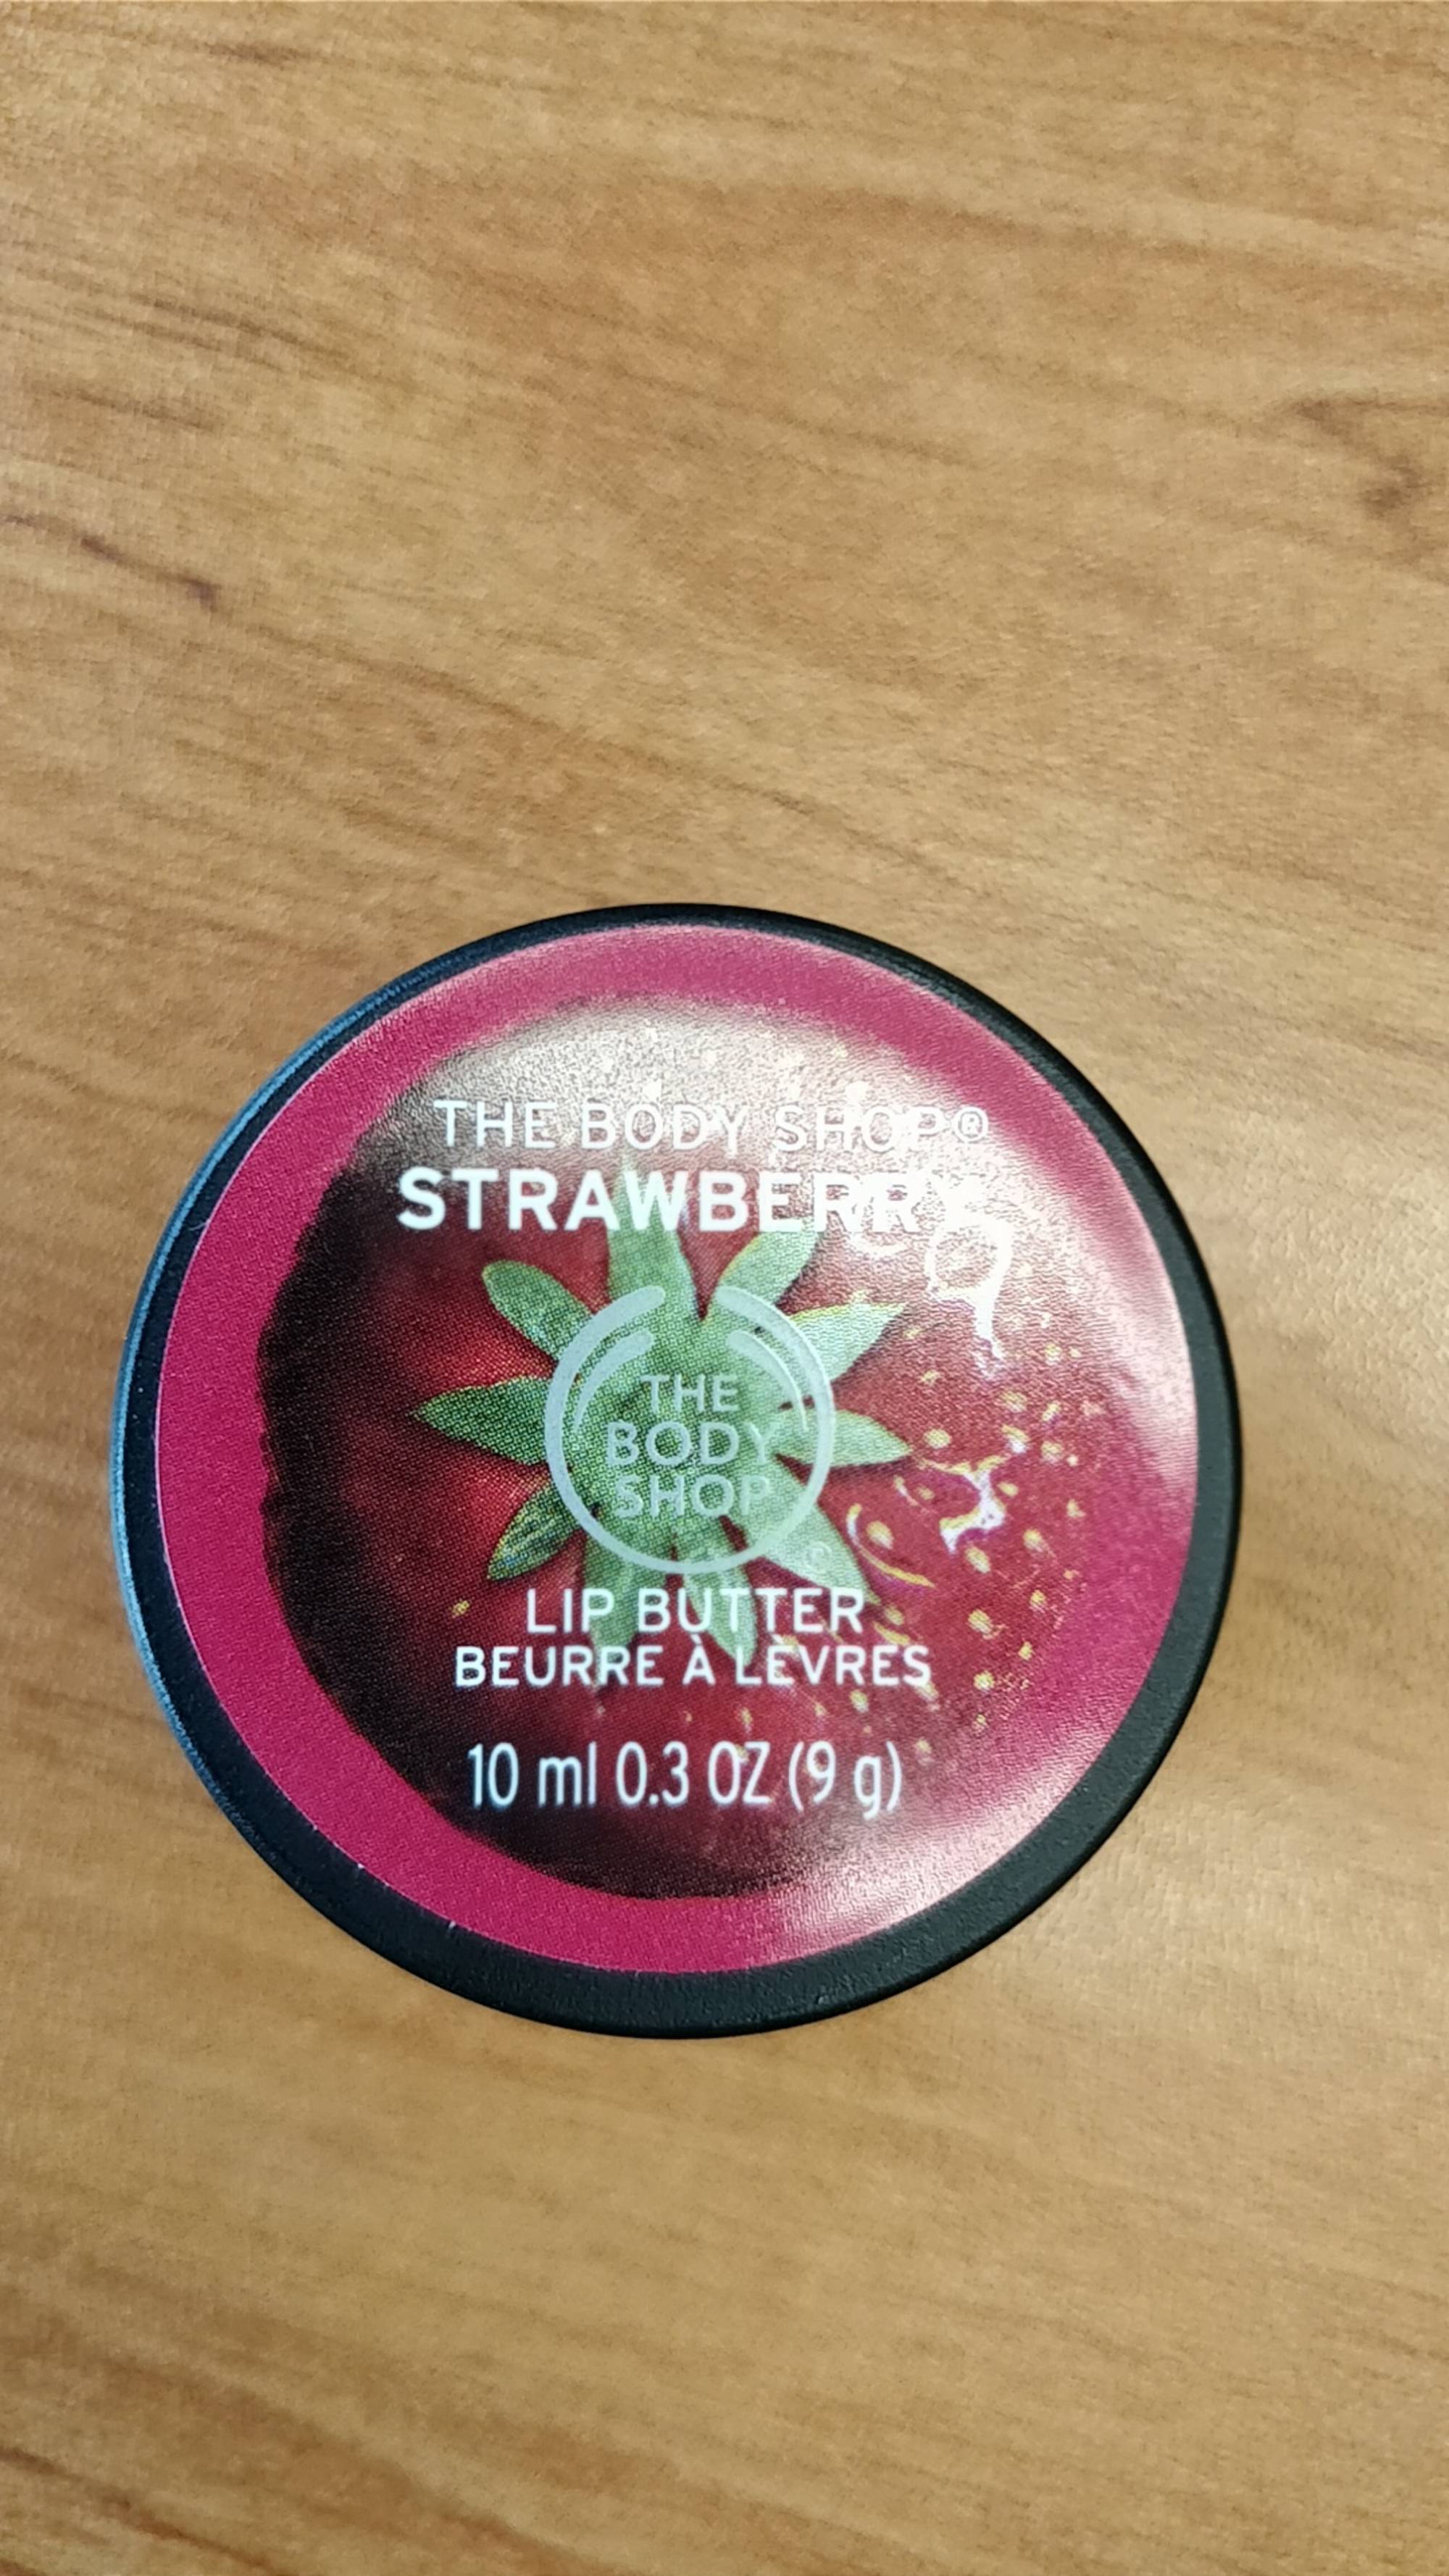 THE BODY SHOP - Strawberry - Lip butter